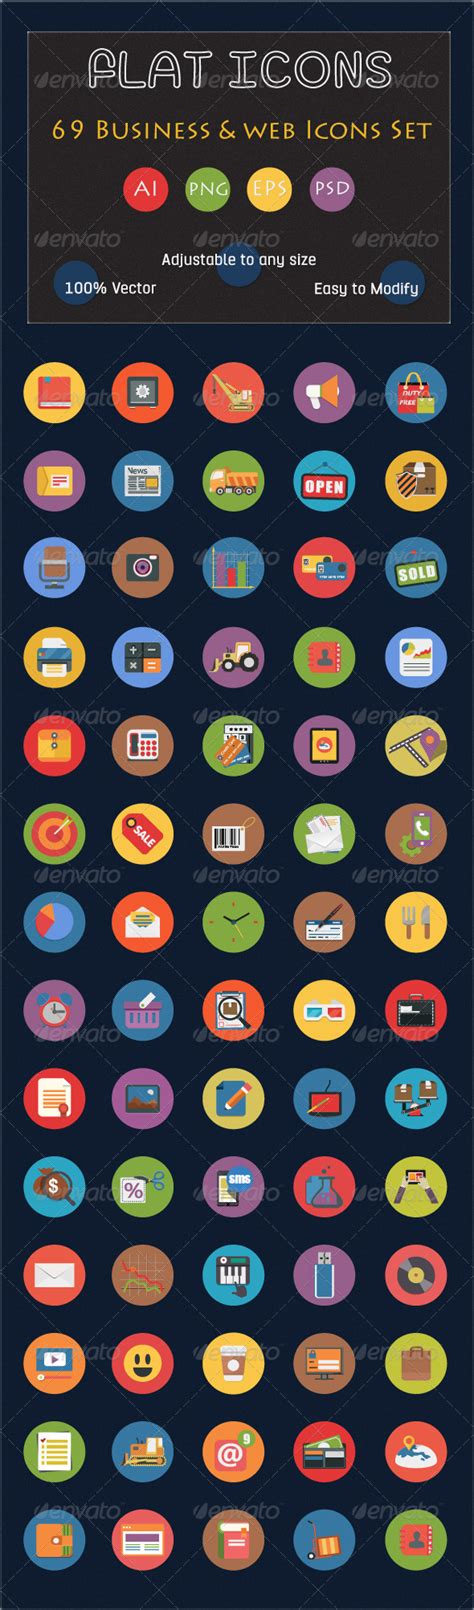 69 Flat Icons Business And Web Services Icon By Cursorch